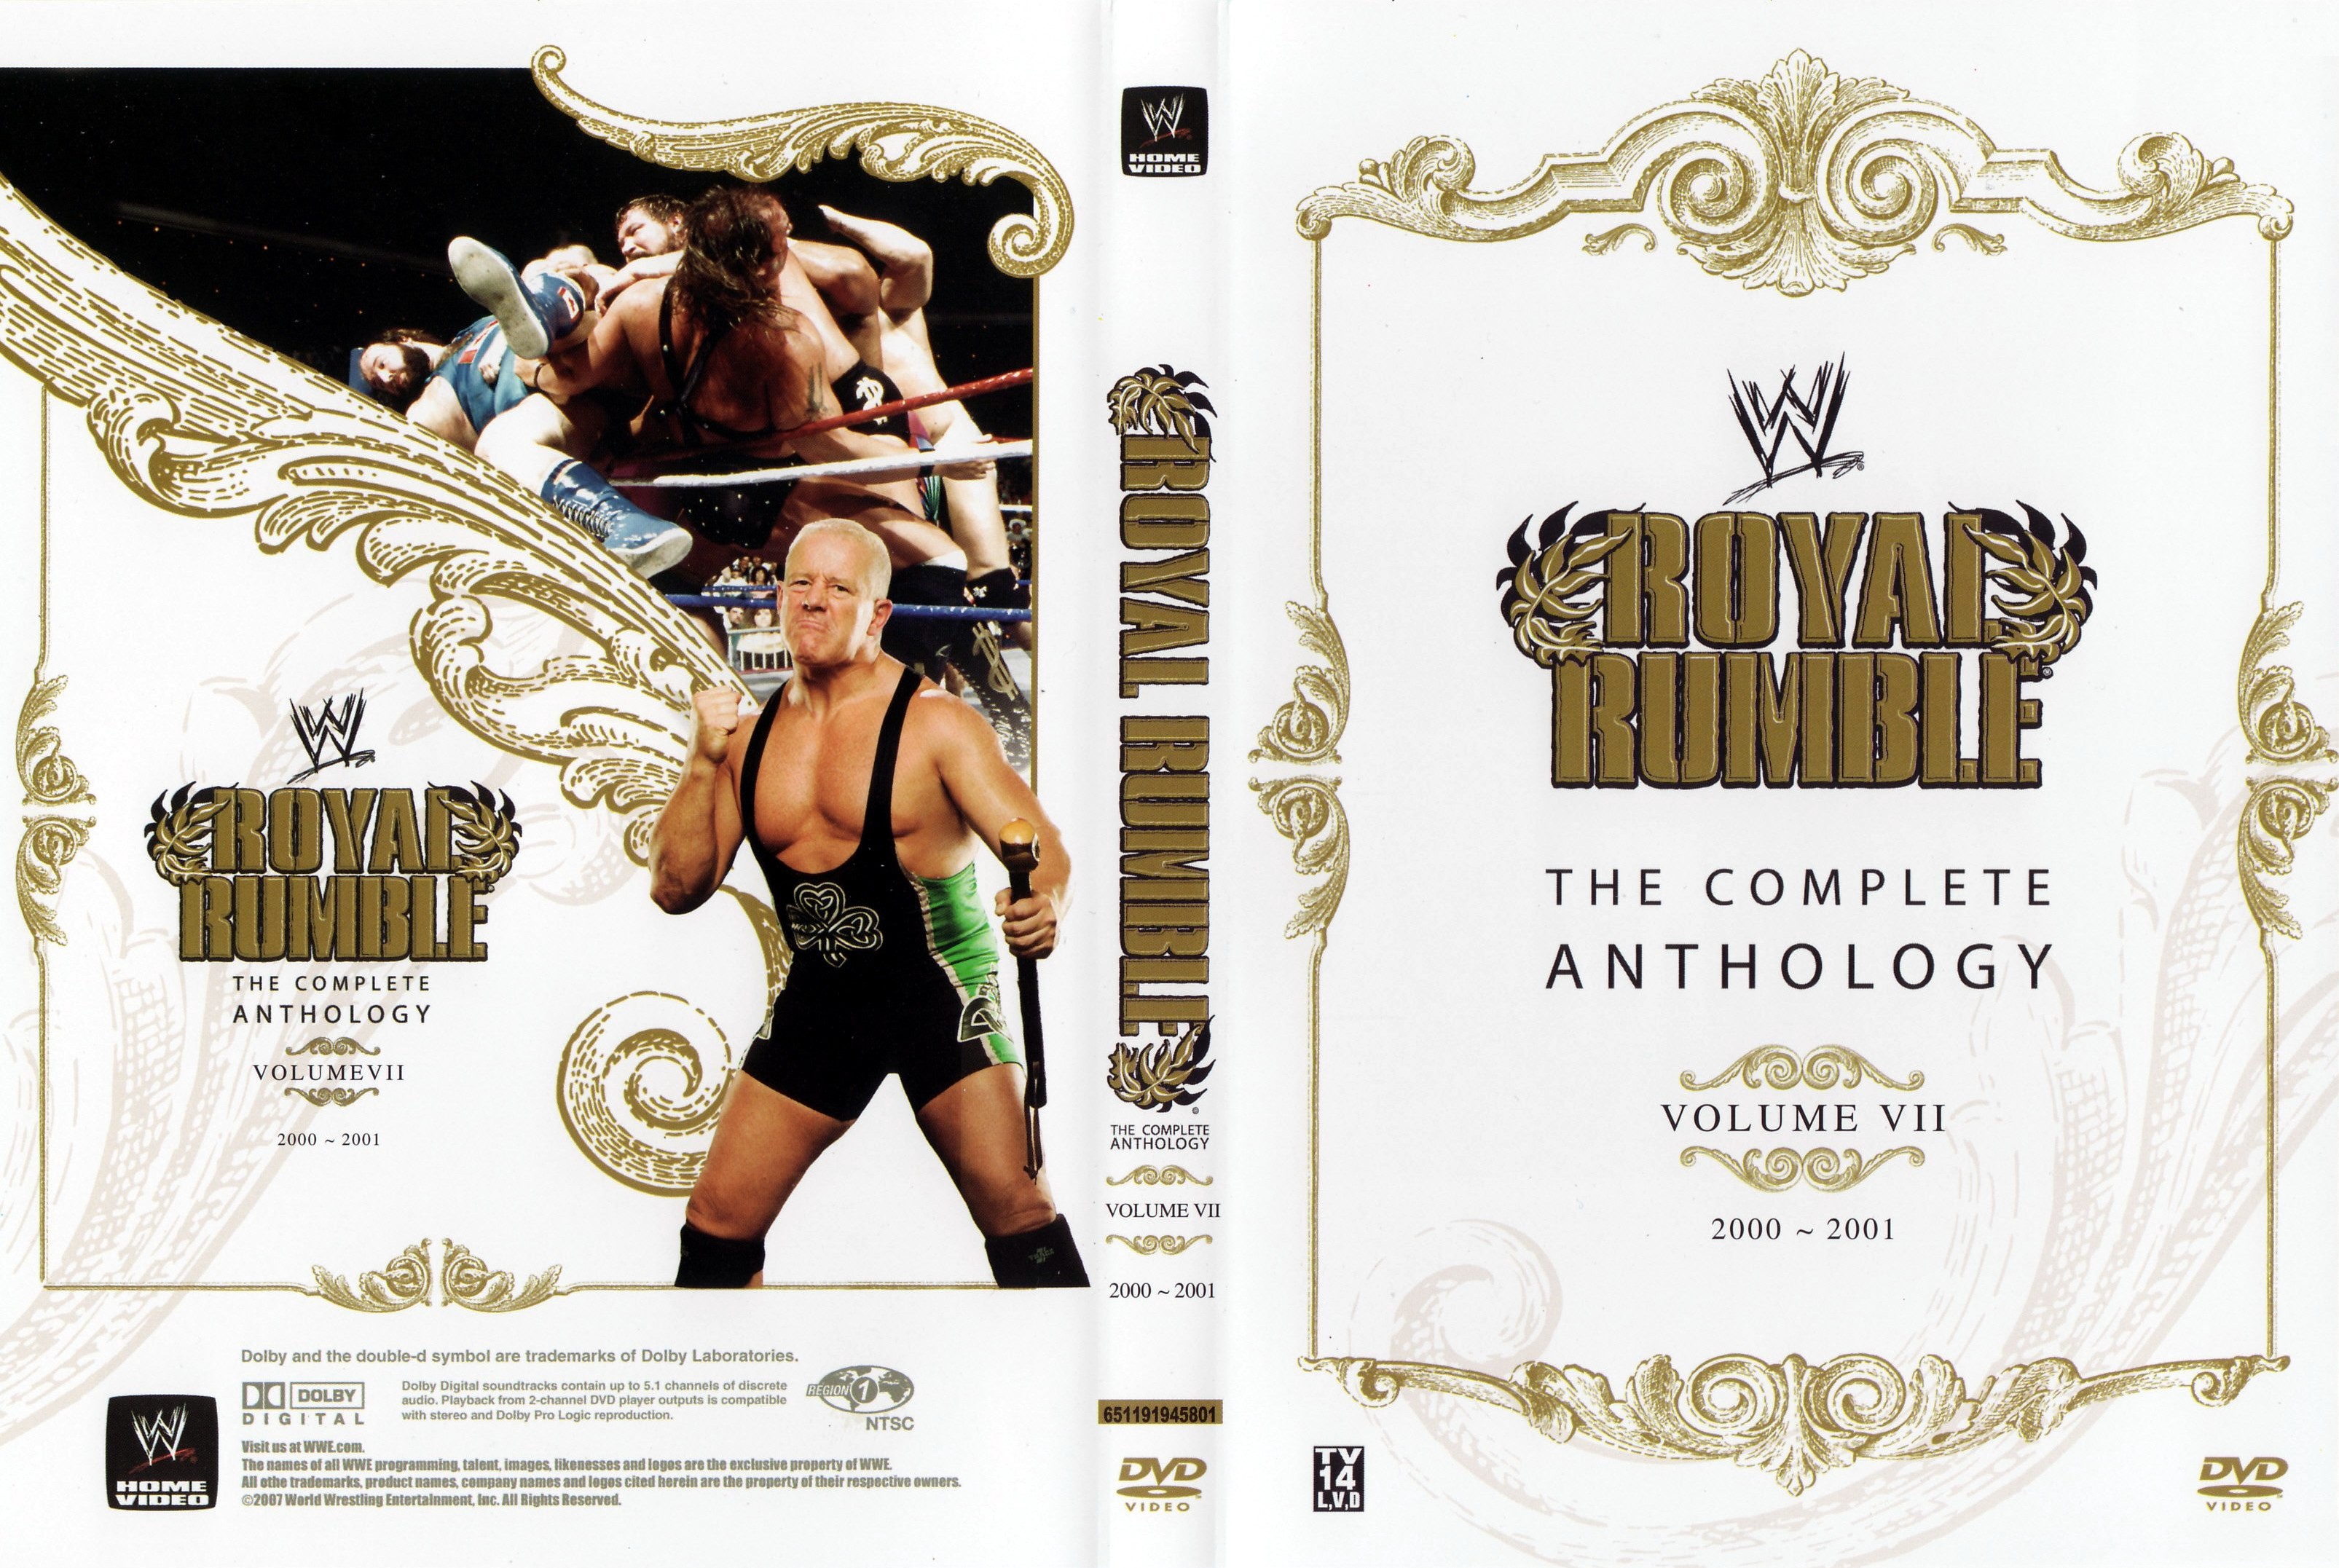 Jaquette DVD WWE Royal Rumble the complete antology vol 07